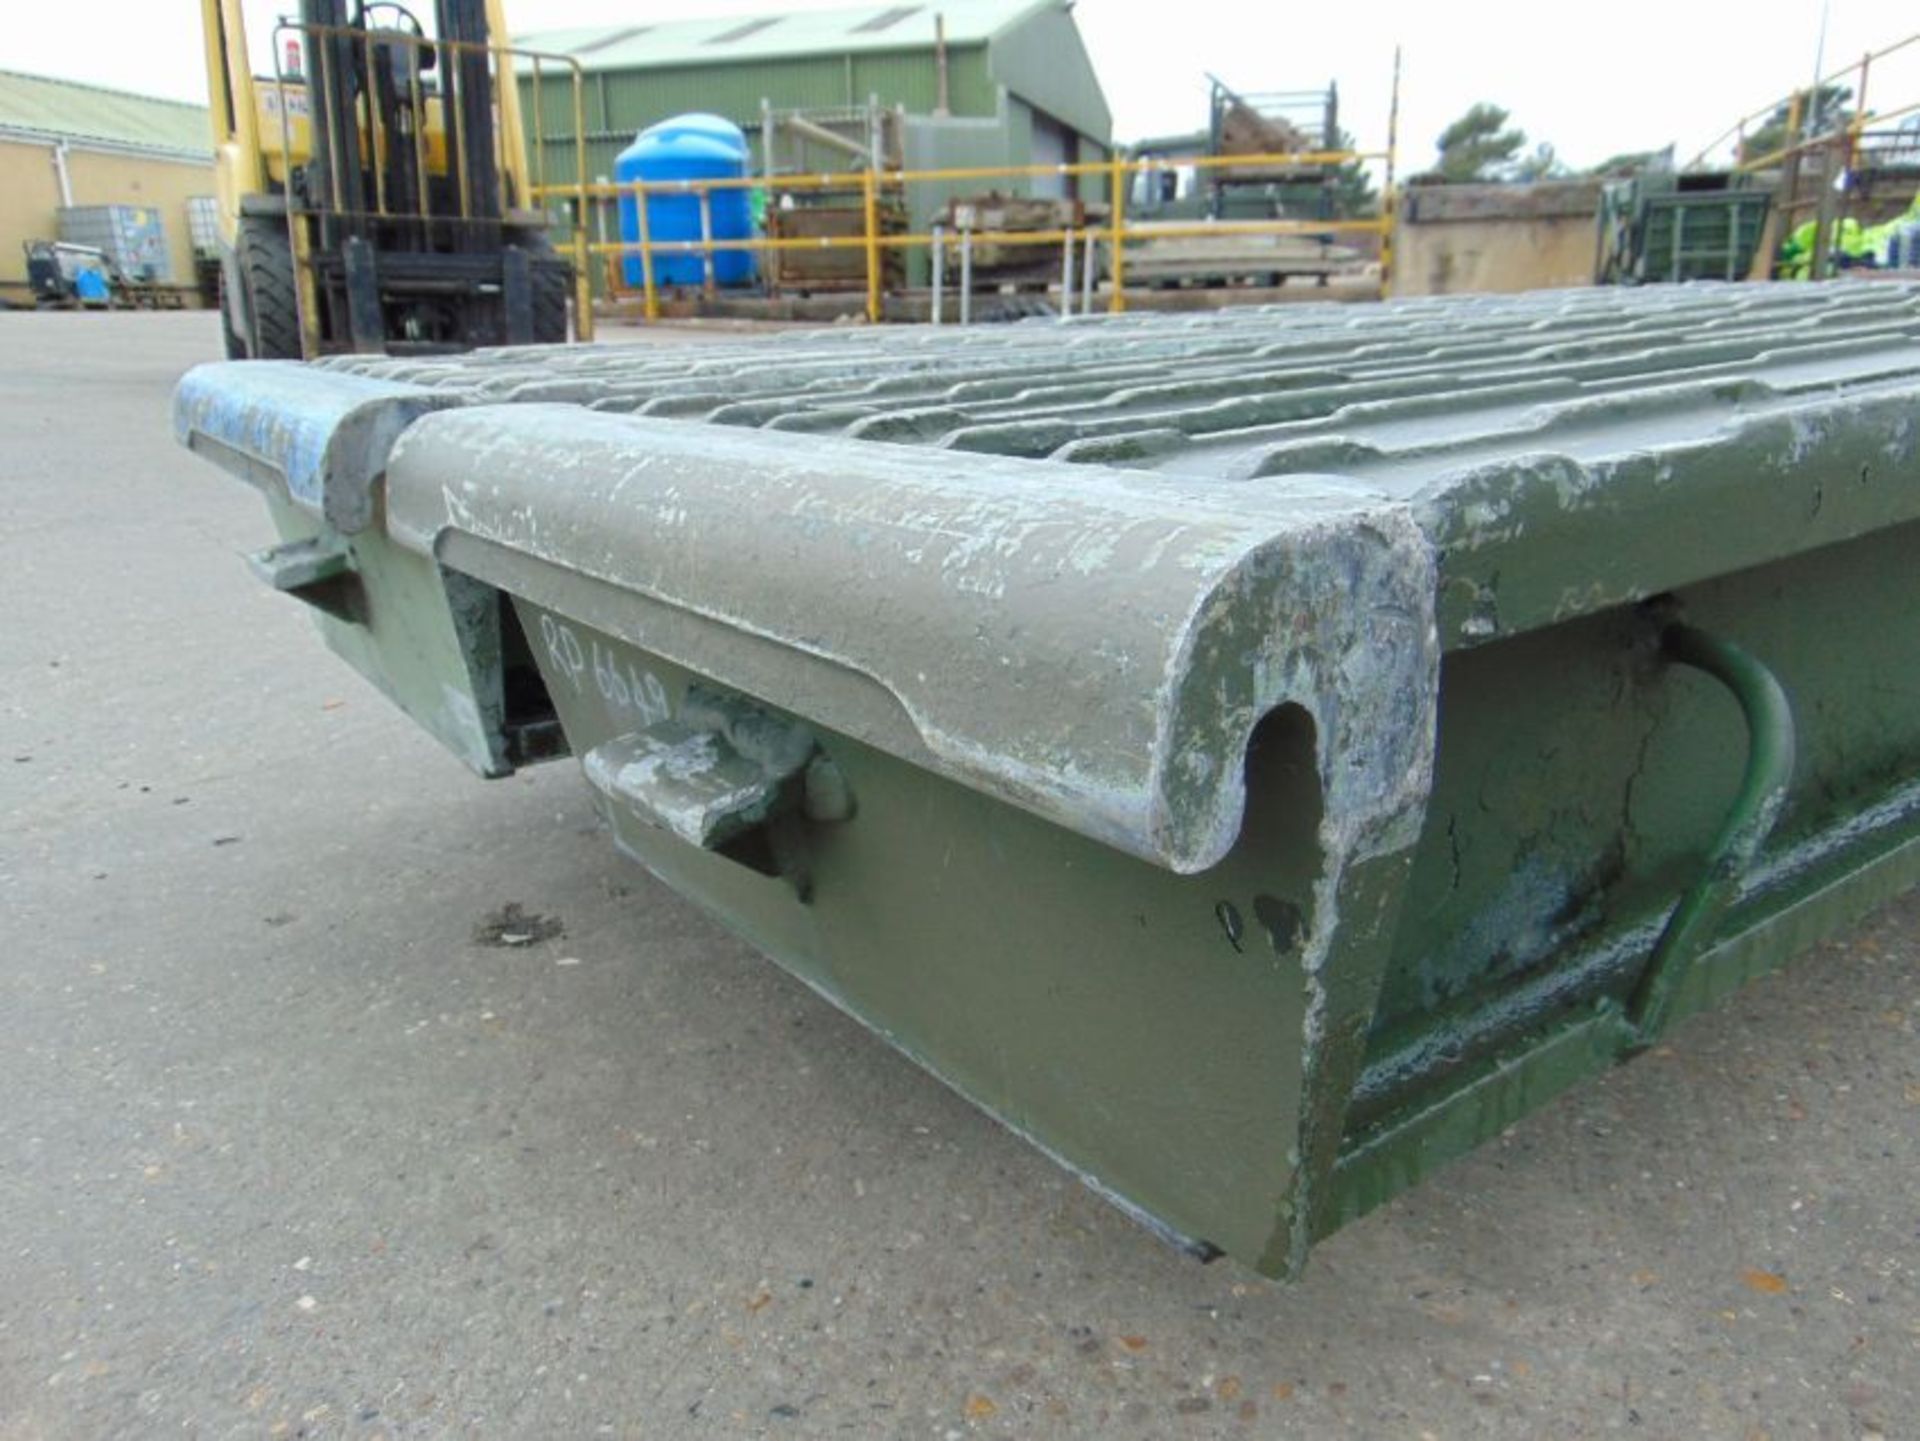 Pair of Very Heavy Duty Aluminium Clip on Vehicle Loading Ramps, 3 m long, 0.54 m wide - Image 6 of 6